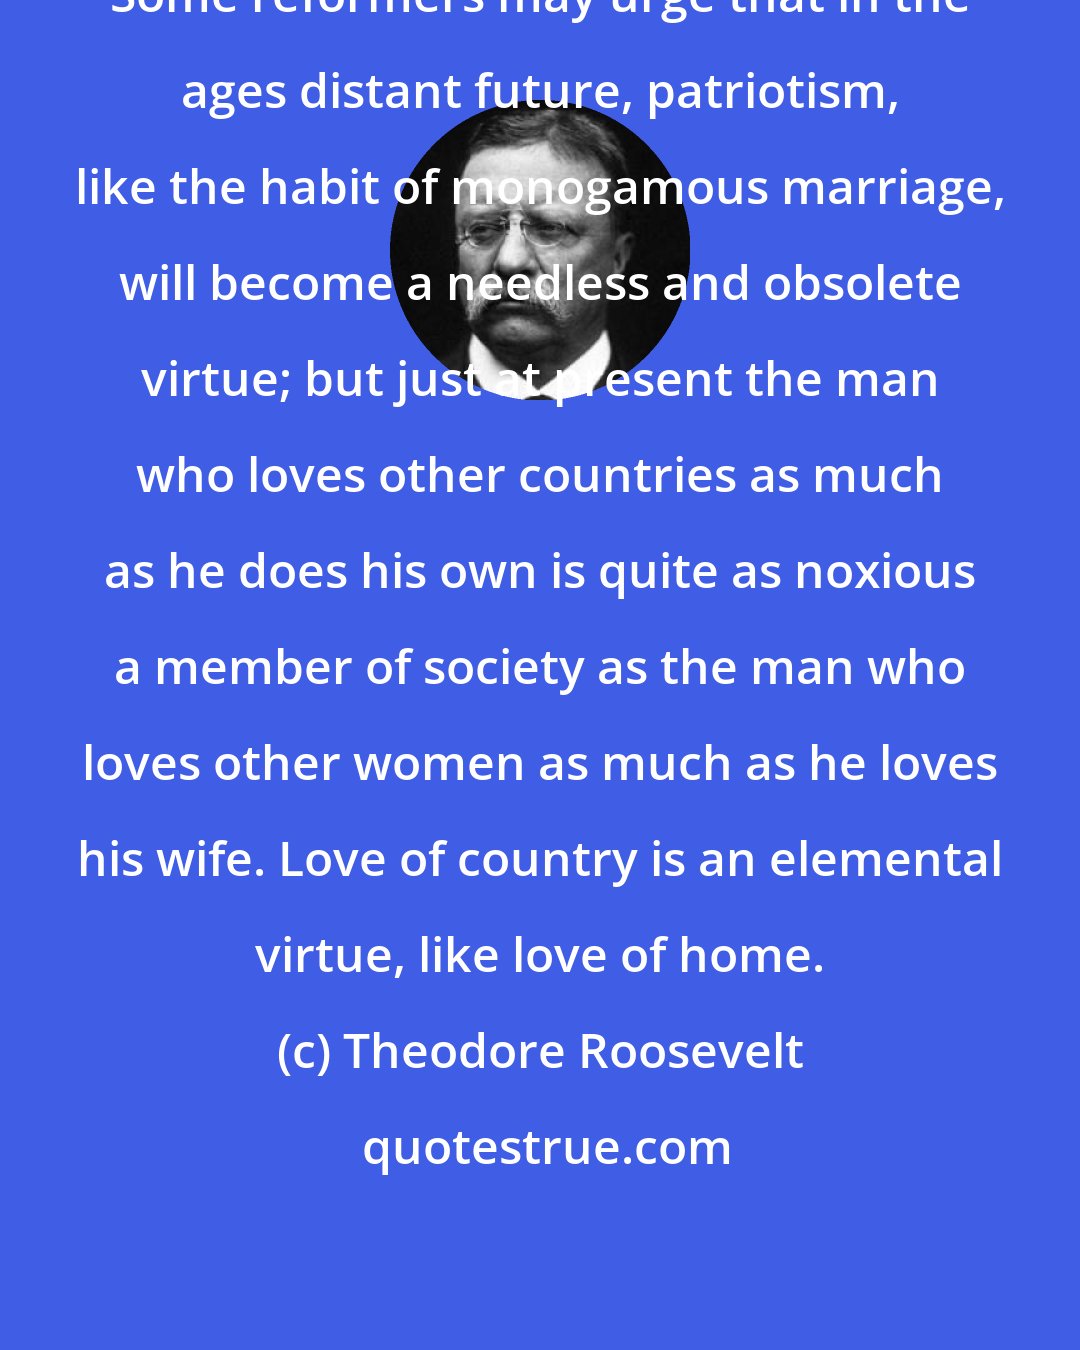 Theodore Roosevelt: Some reformers may urge that in the ages distant future, patriotism, like the habit of monogamous marriage, will become a needless and obsolete virtue; but just at present the man who loves other countries as much as he does his own is quite as noxious a member of society as the man who loves other women as much as he loves his wife. Love of country is an elemental virtue, like love of home.